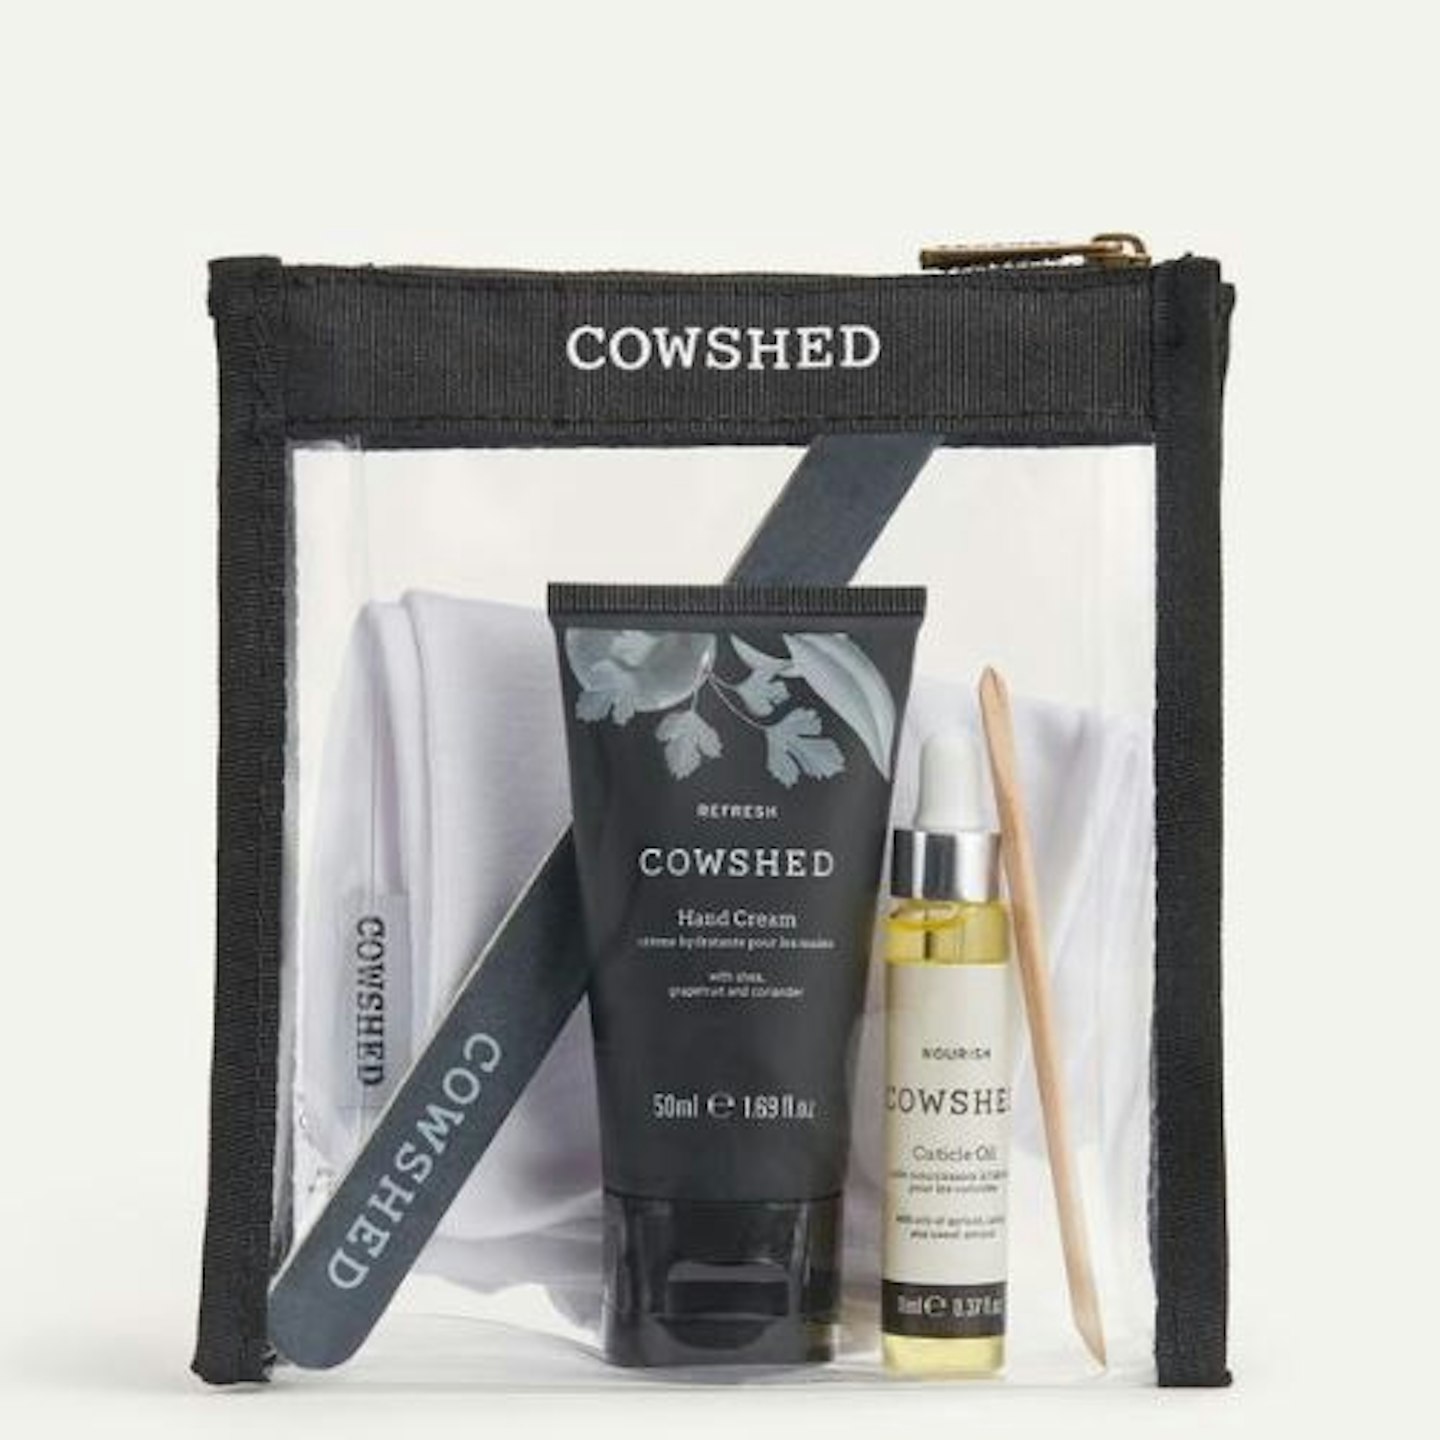 Cowshed, Manicure Kit